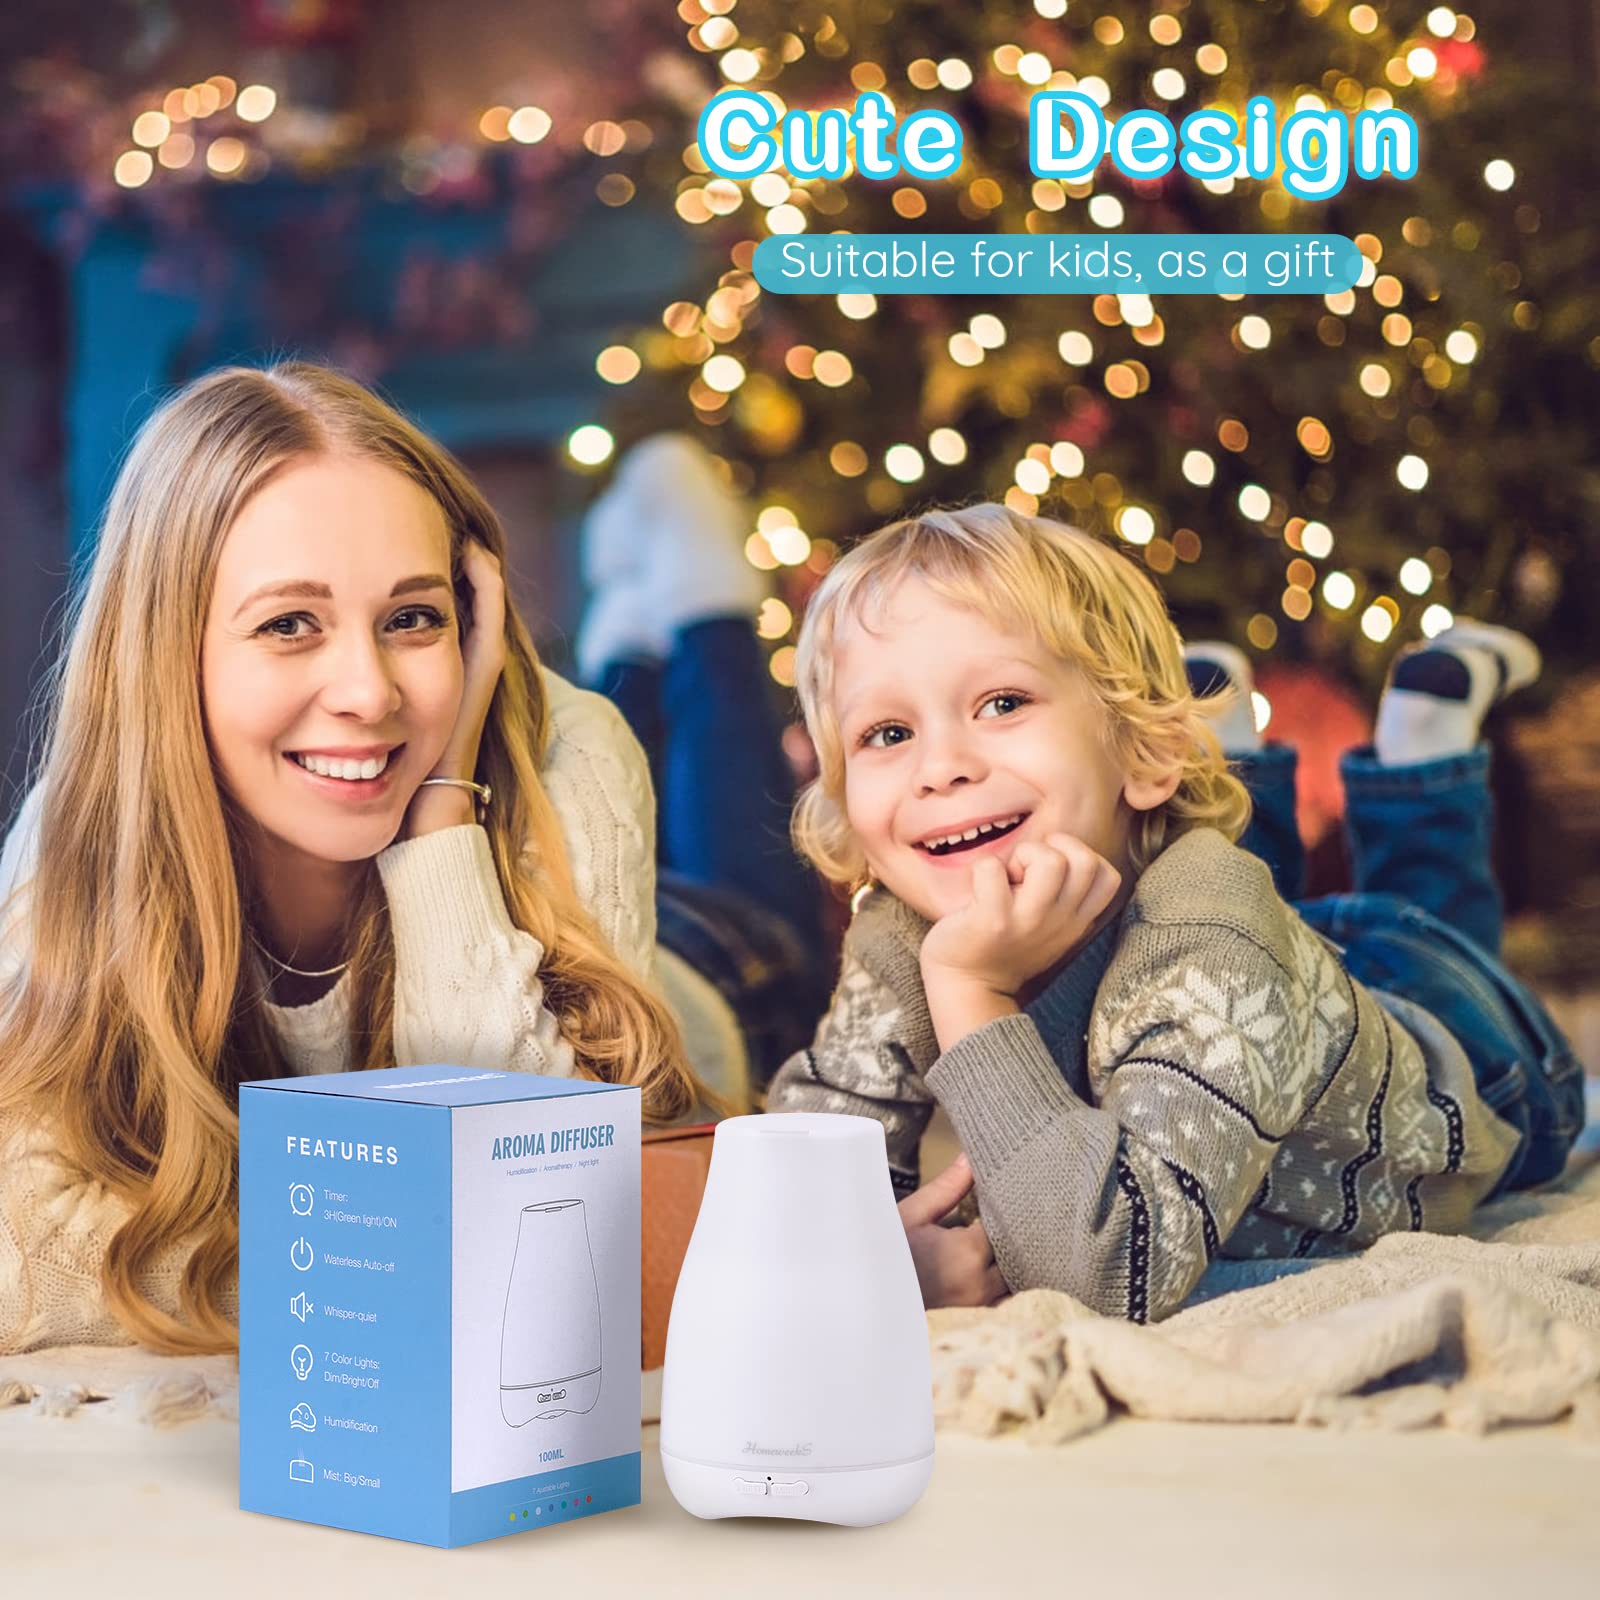 Homeweeks Diffusers, 100ml Colorful Essential Oil Diffuser with Adjustable Mist Mode,Auto Off Aroma Diffuser for Bedroom/Office/Trip (100 ML 1 Pack)